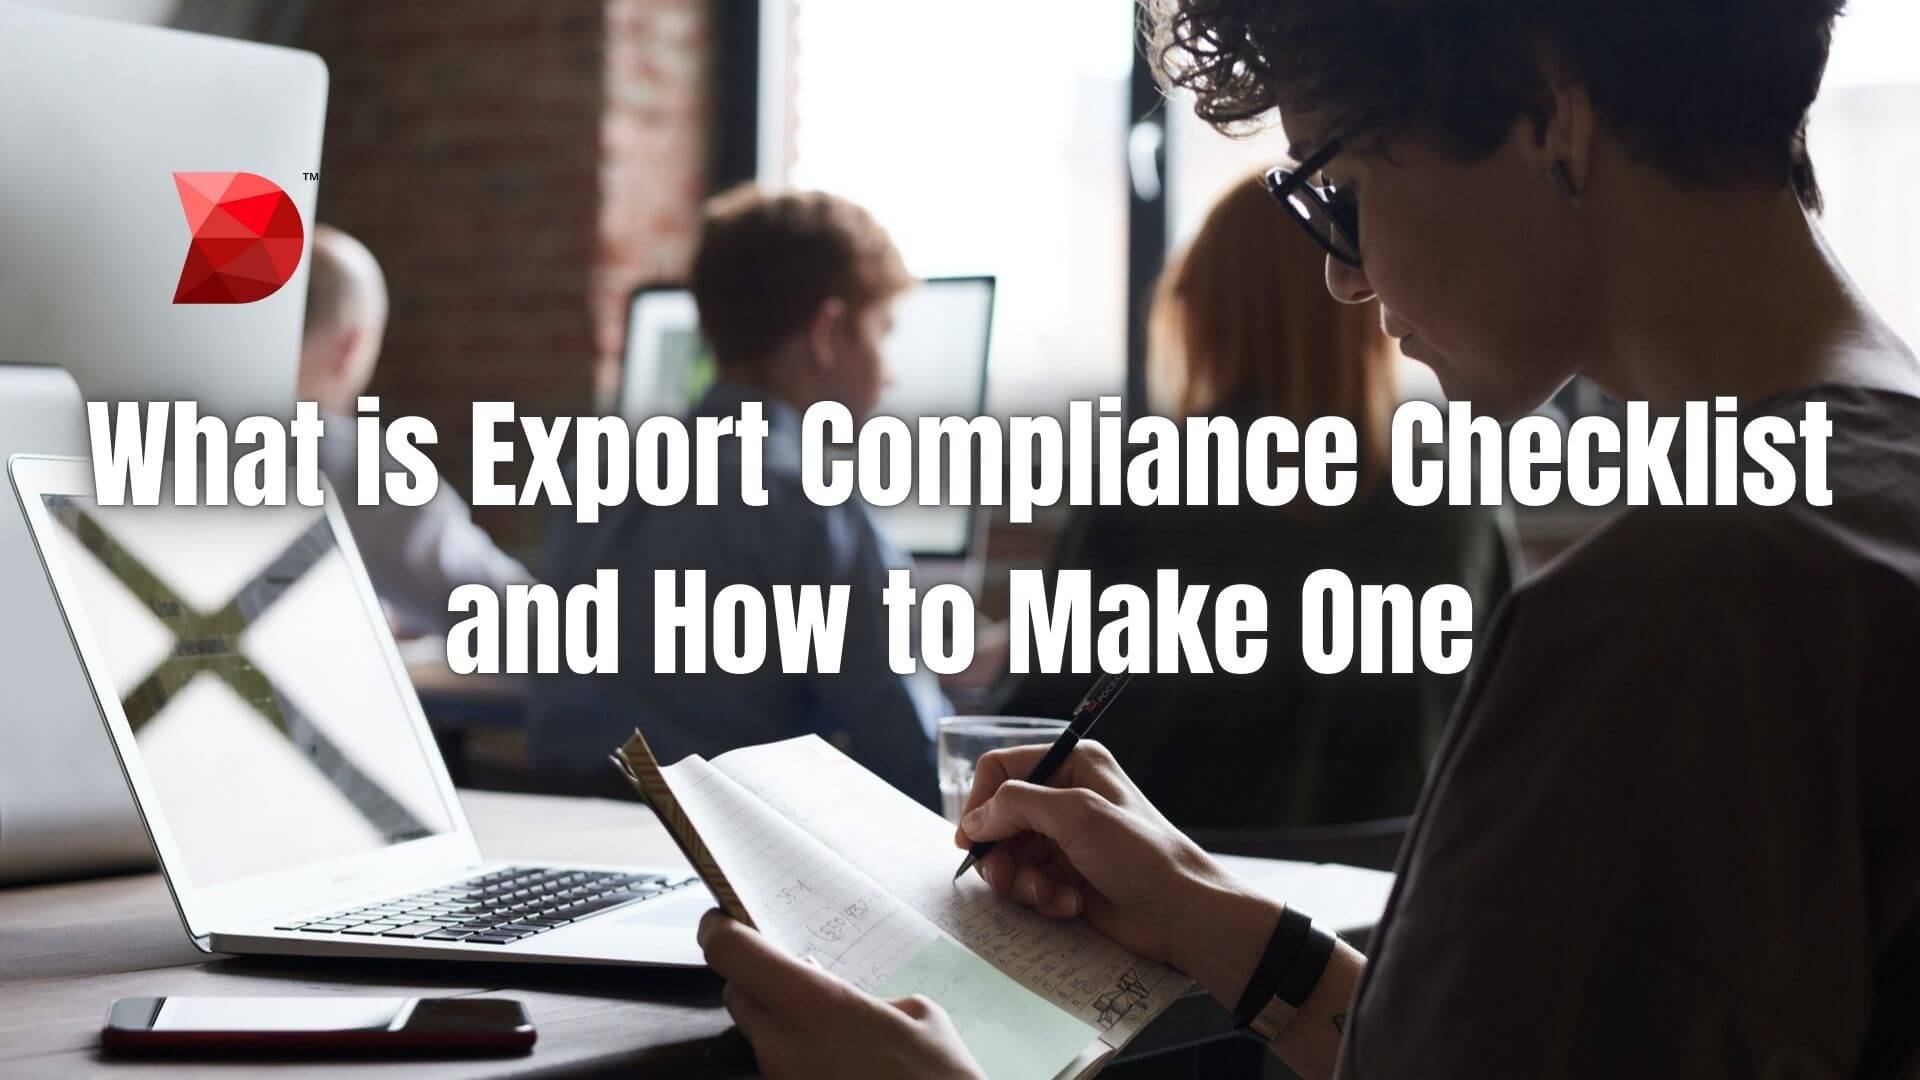 What is Export Compliance Checklist and How to Make One